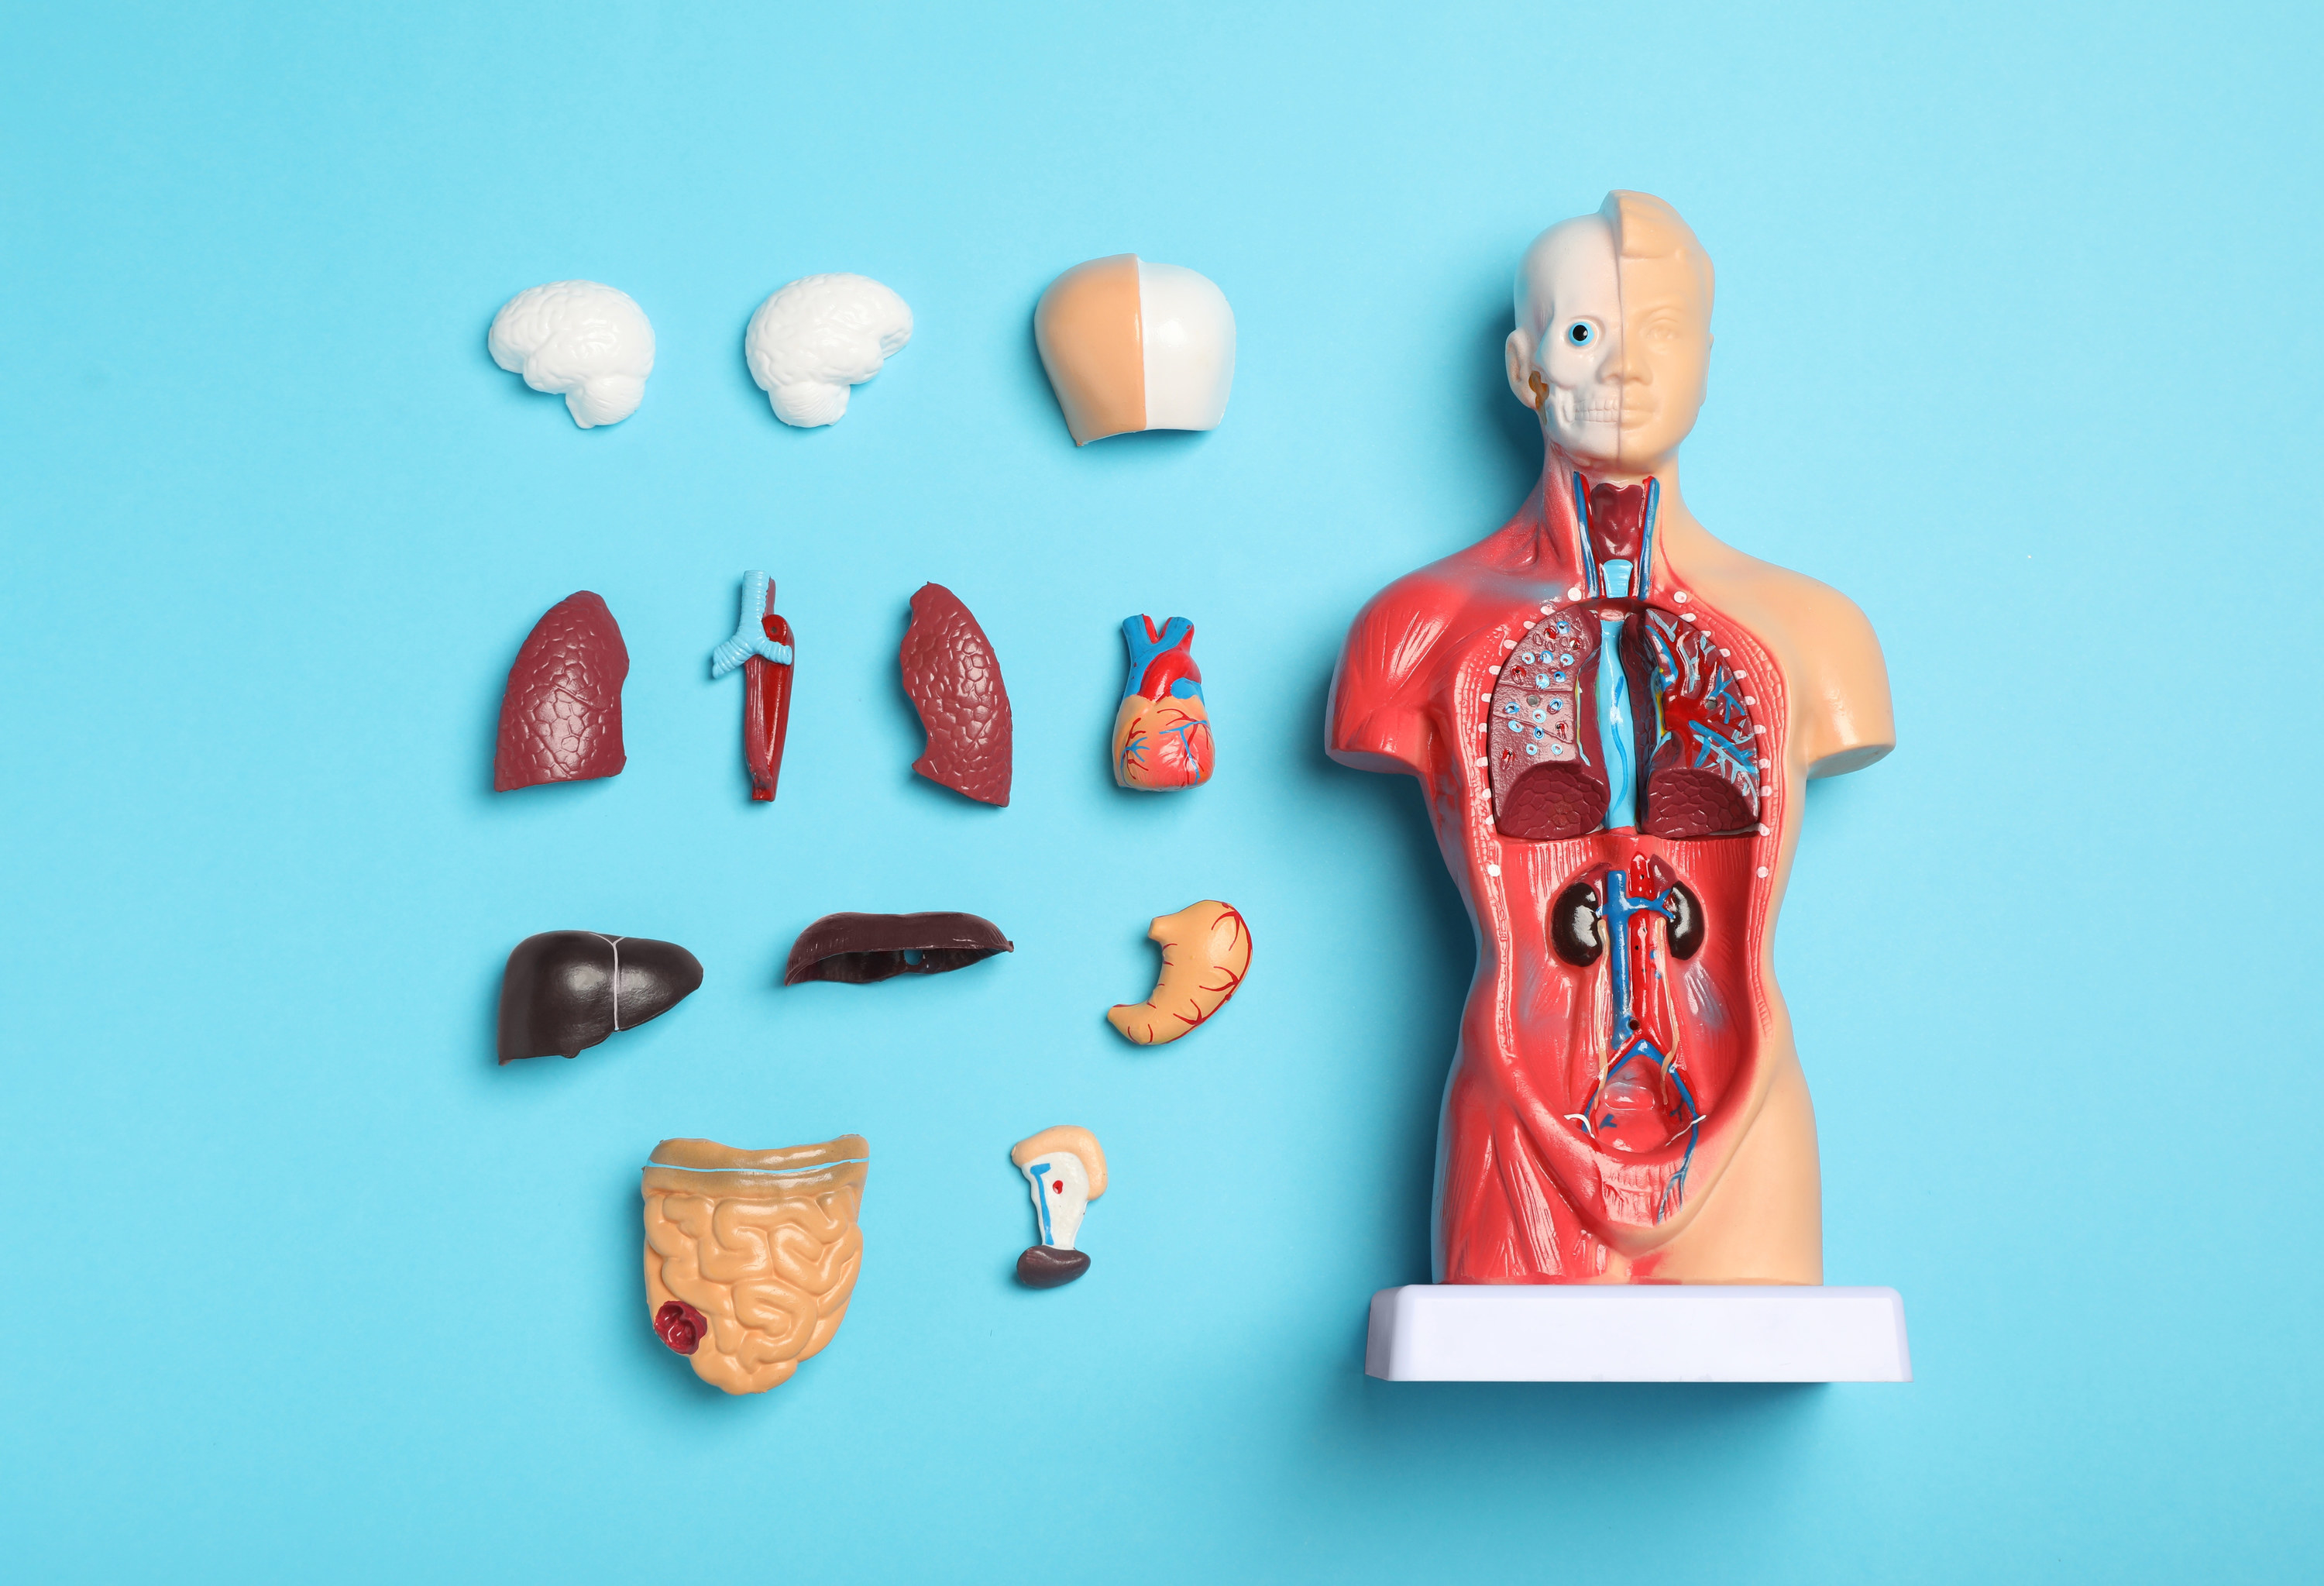 parts of the body laid out next to a realistic model